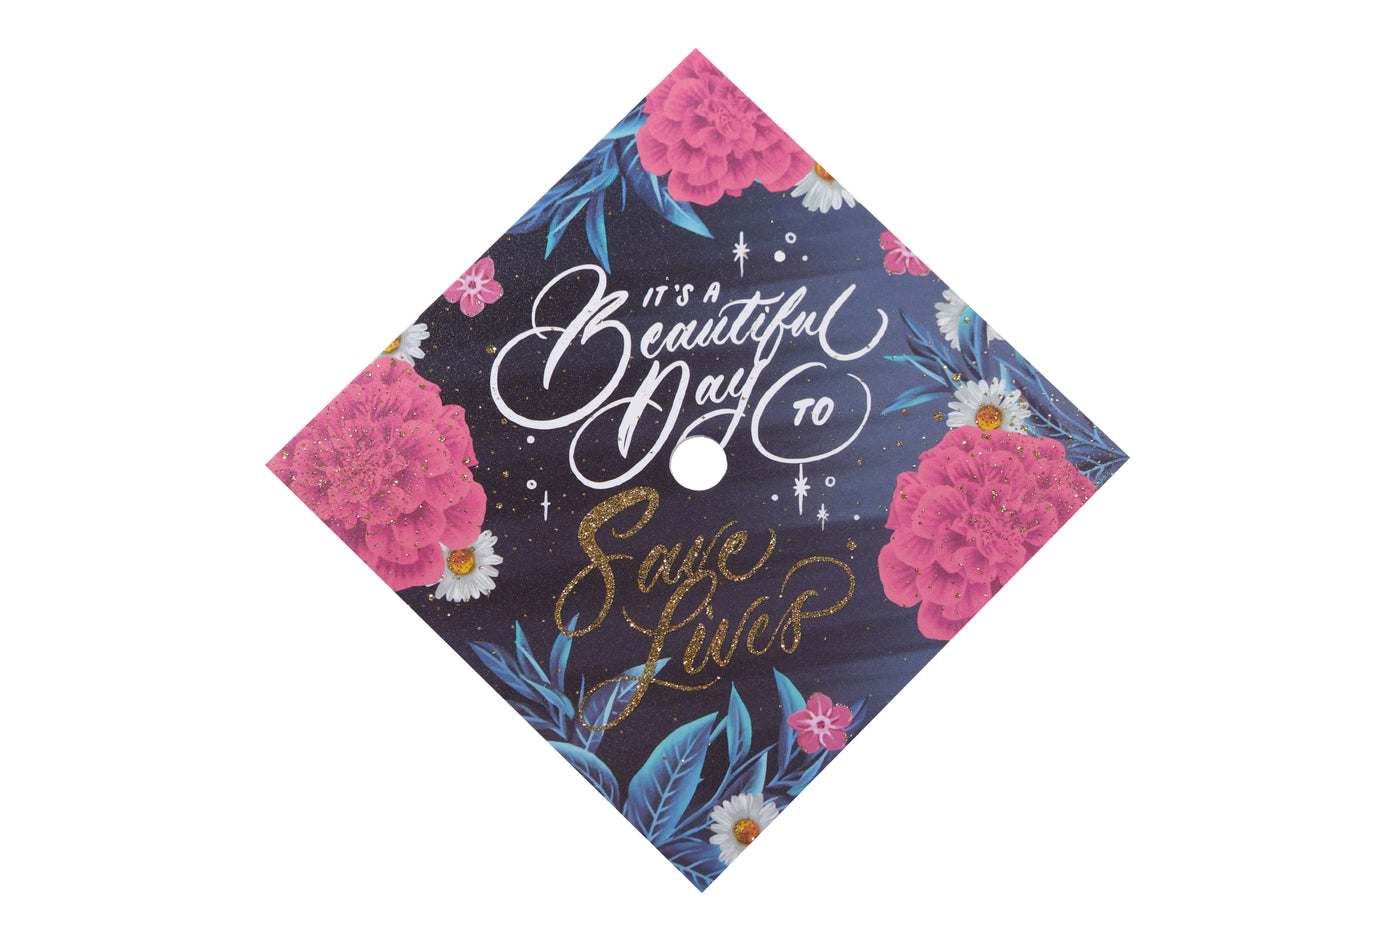 Graduation cap topper art print, It is a beautiful day to save lives